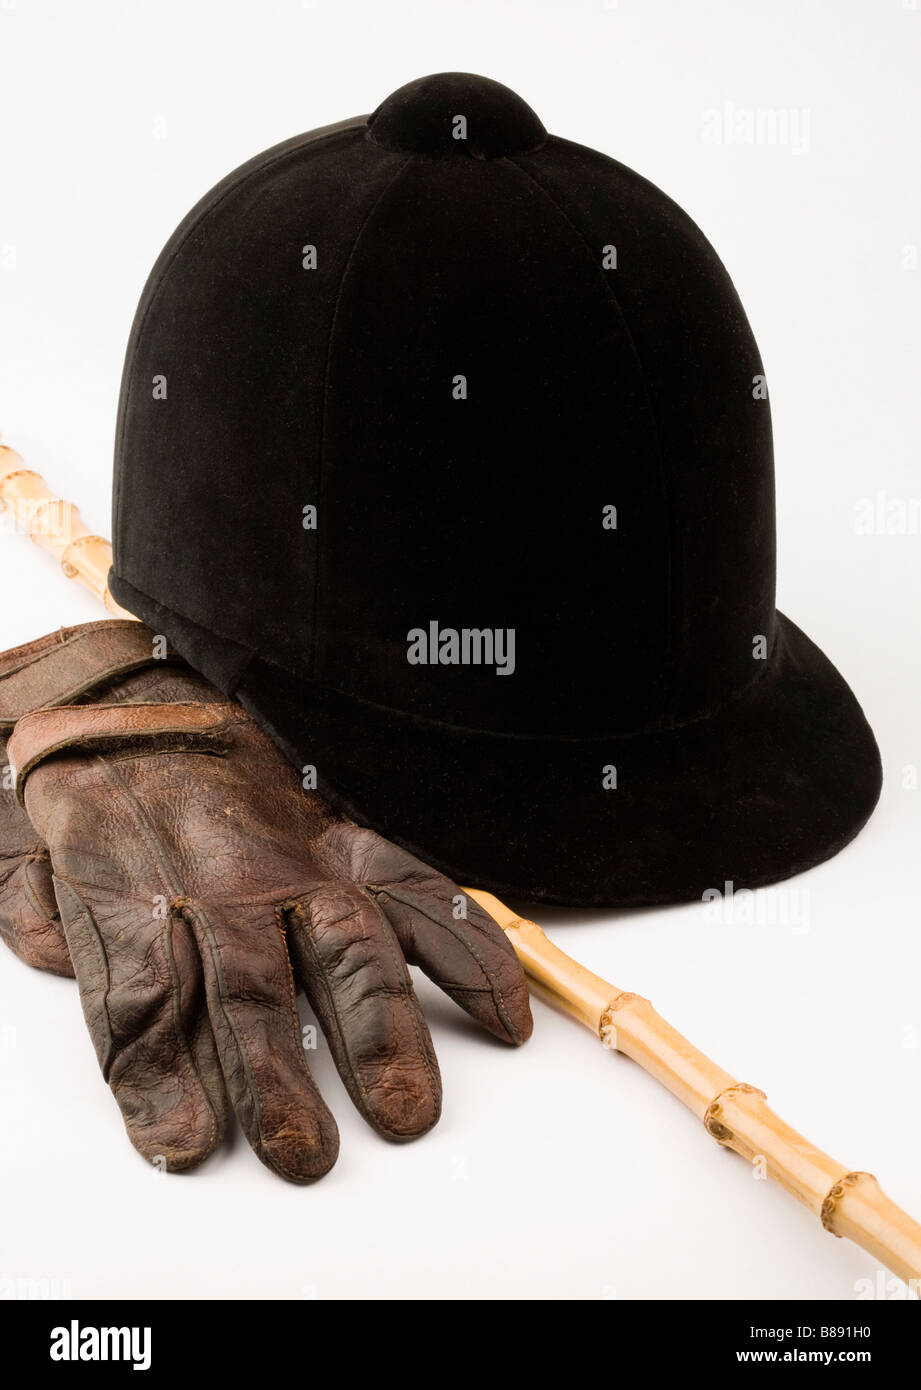 Hat Gloves and Cane Stock Photo